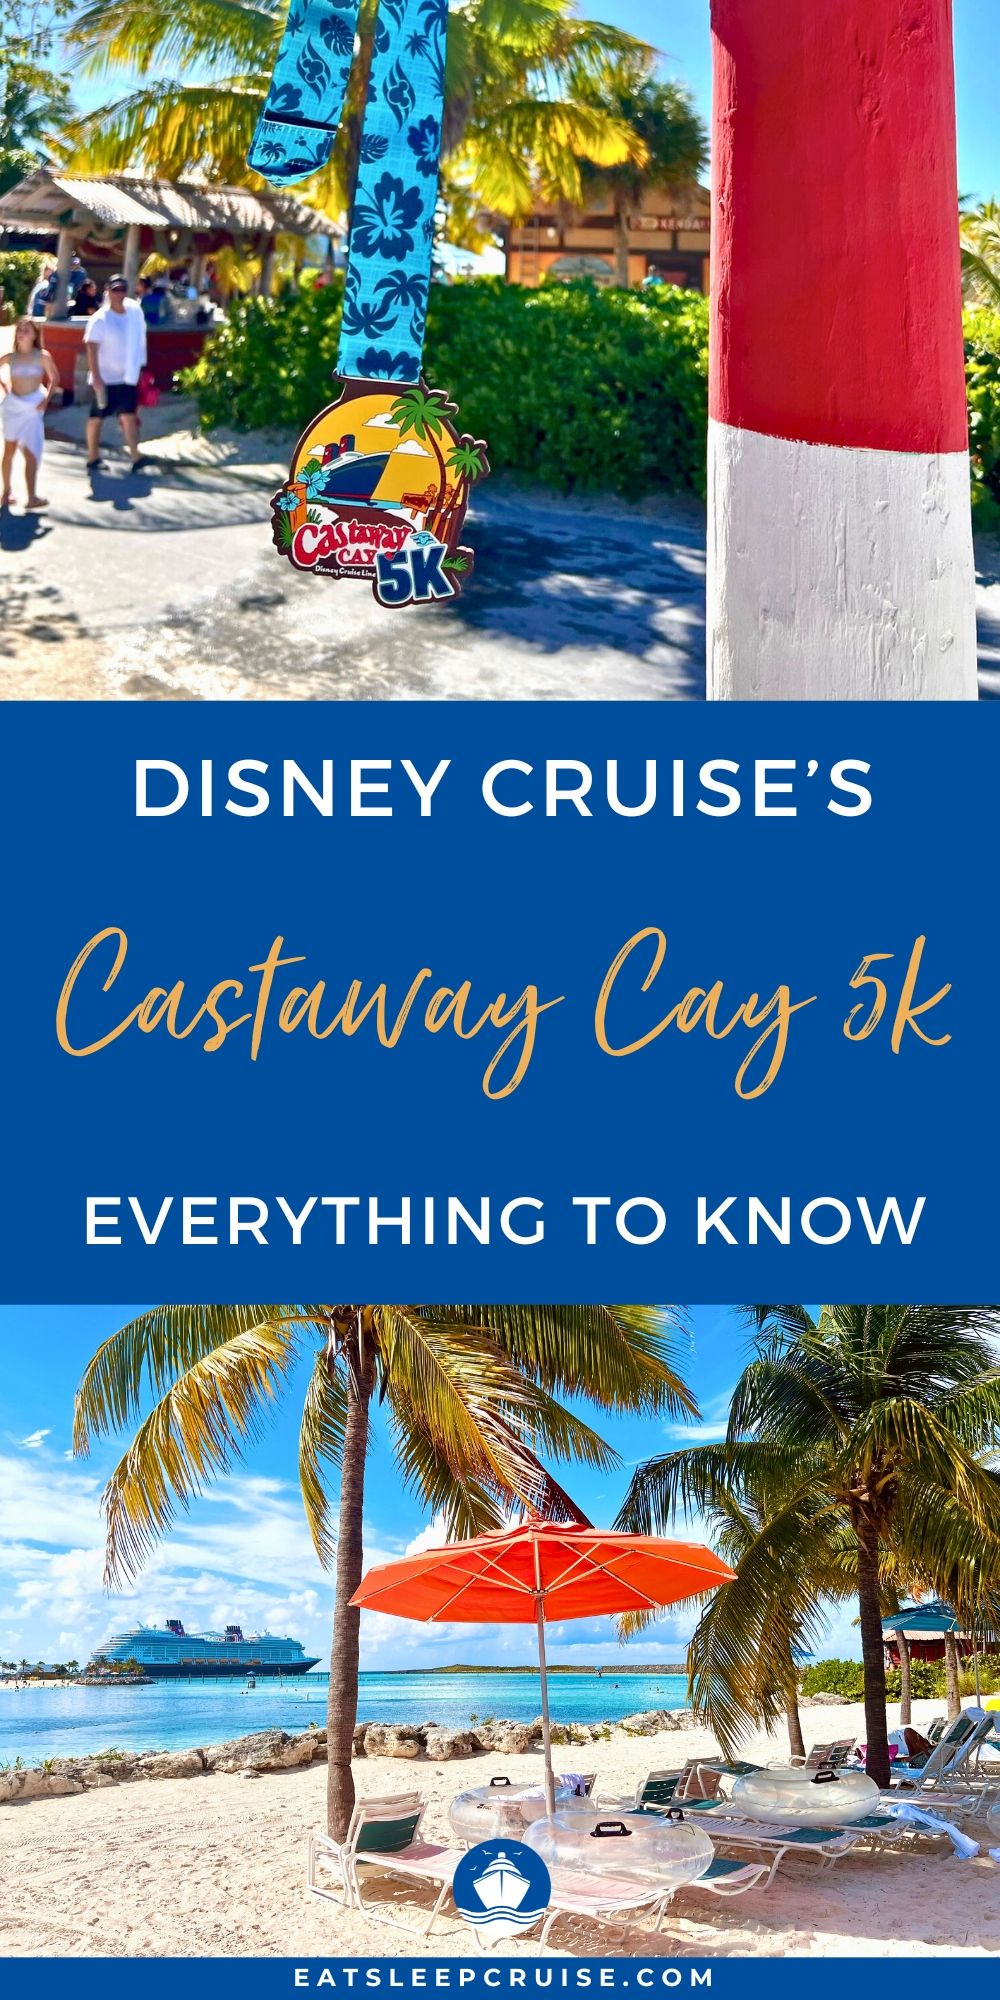 Castaway Cay 5K: Your Guide to the Race Around Disney's Private Island